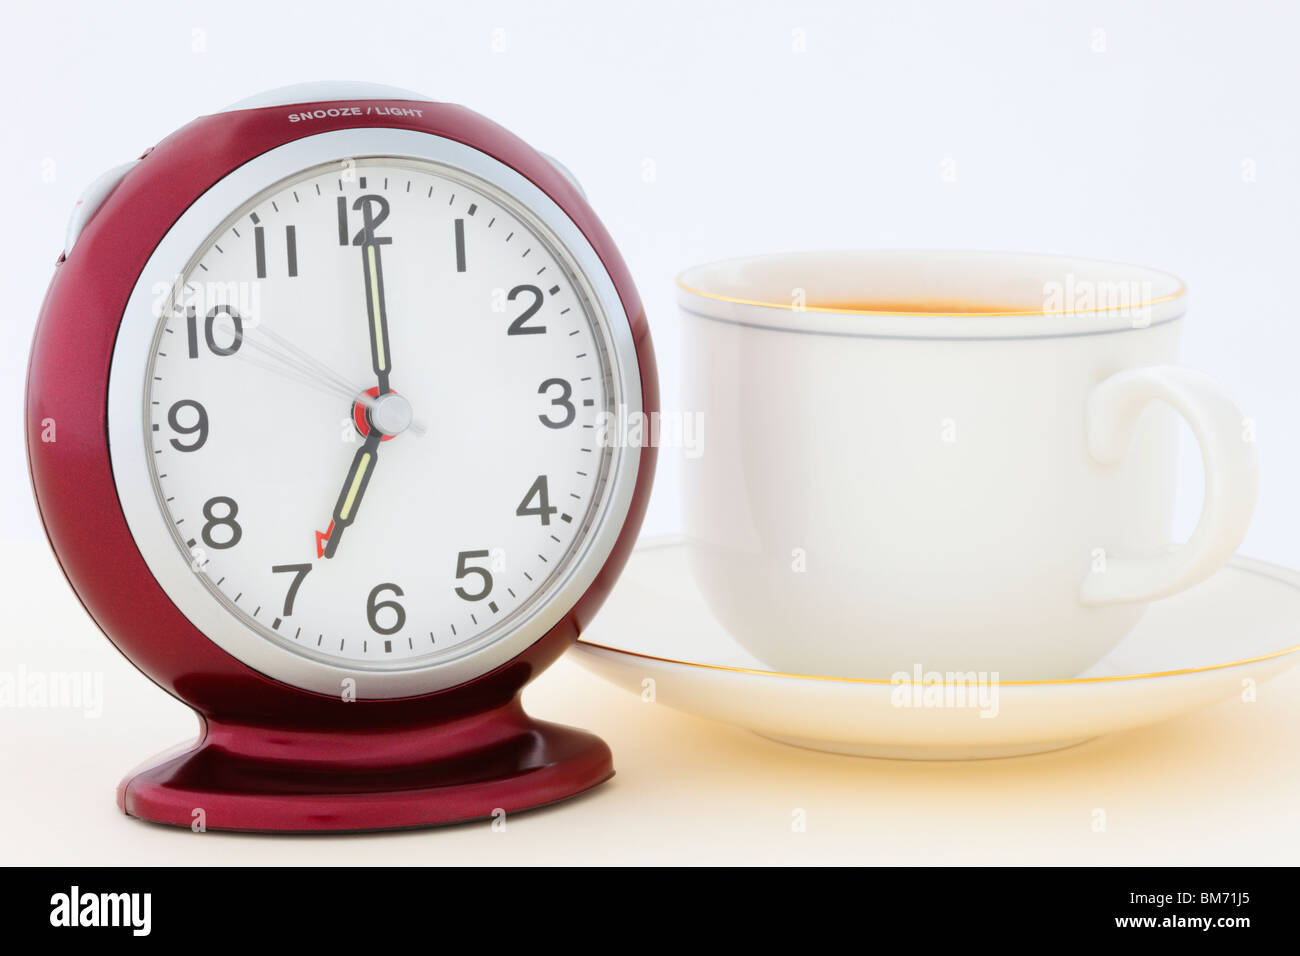 Tea cup and saucer by a red alarm clock at 7am in the morning just seconds before the alarm rings. Wake up and tea in bed concept. England UK Britain Stock Photo